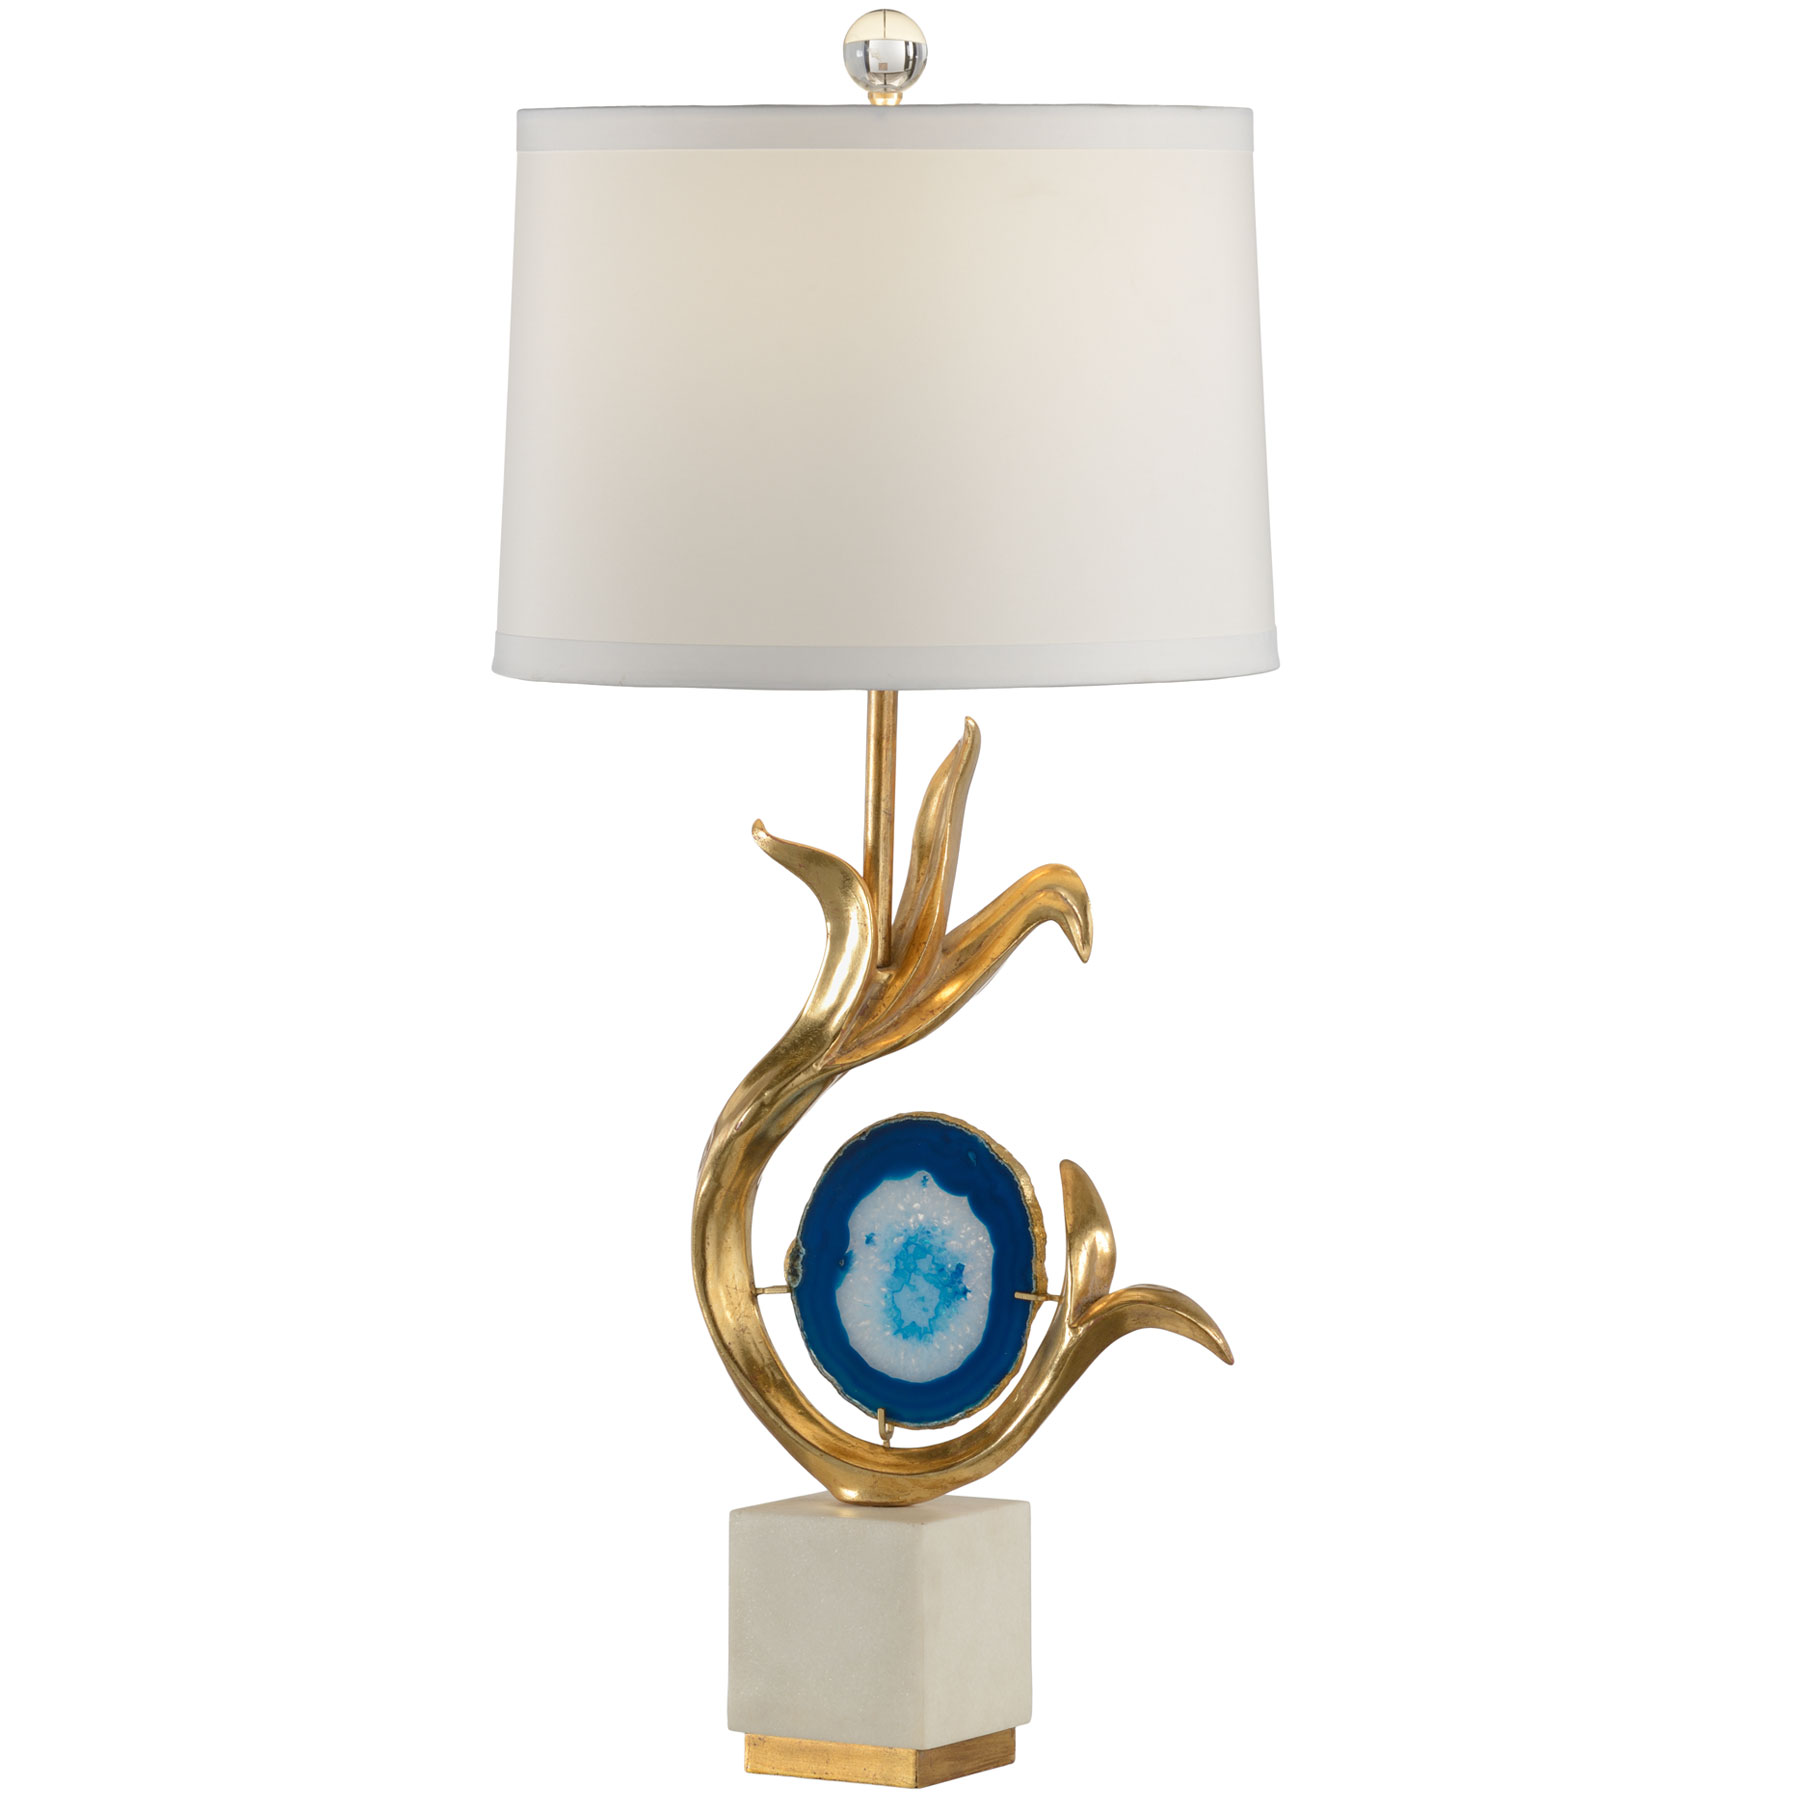 Blue Agate Lamp Inviting Home, Agate Stone Table Lamp